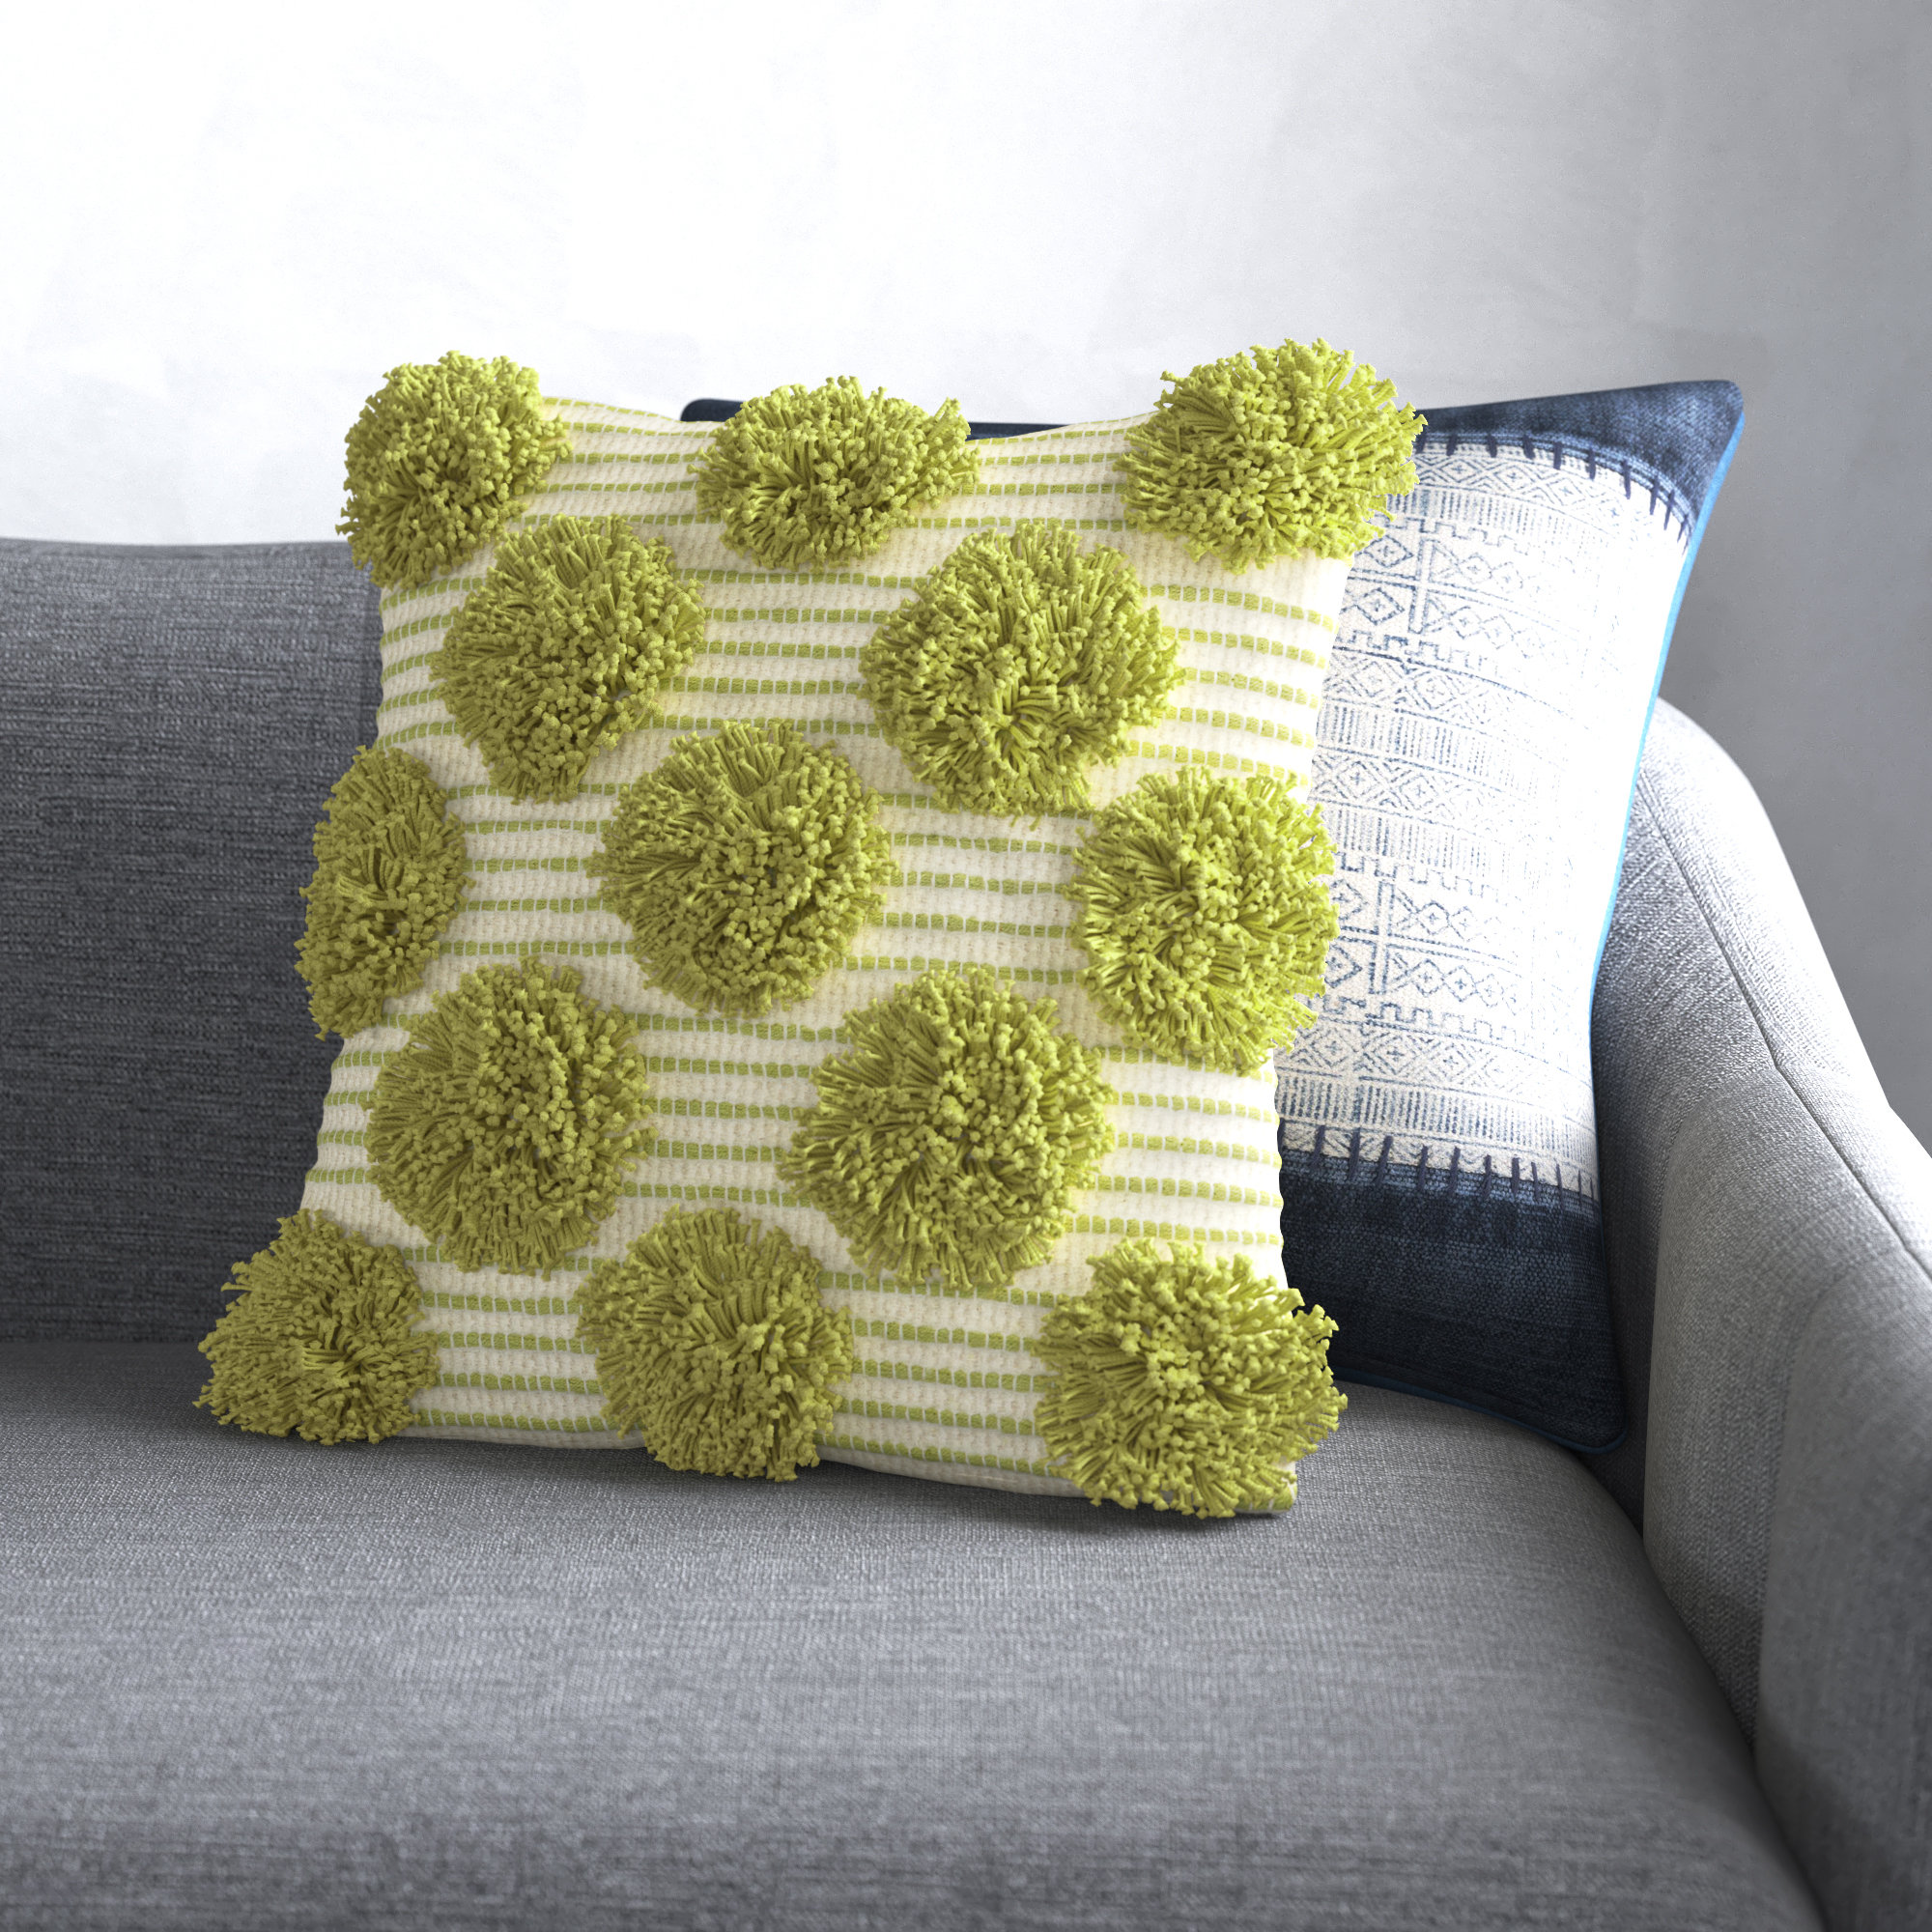 Olive Green and Yellow large Pom Poms